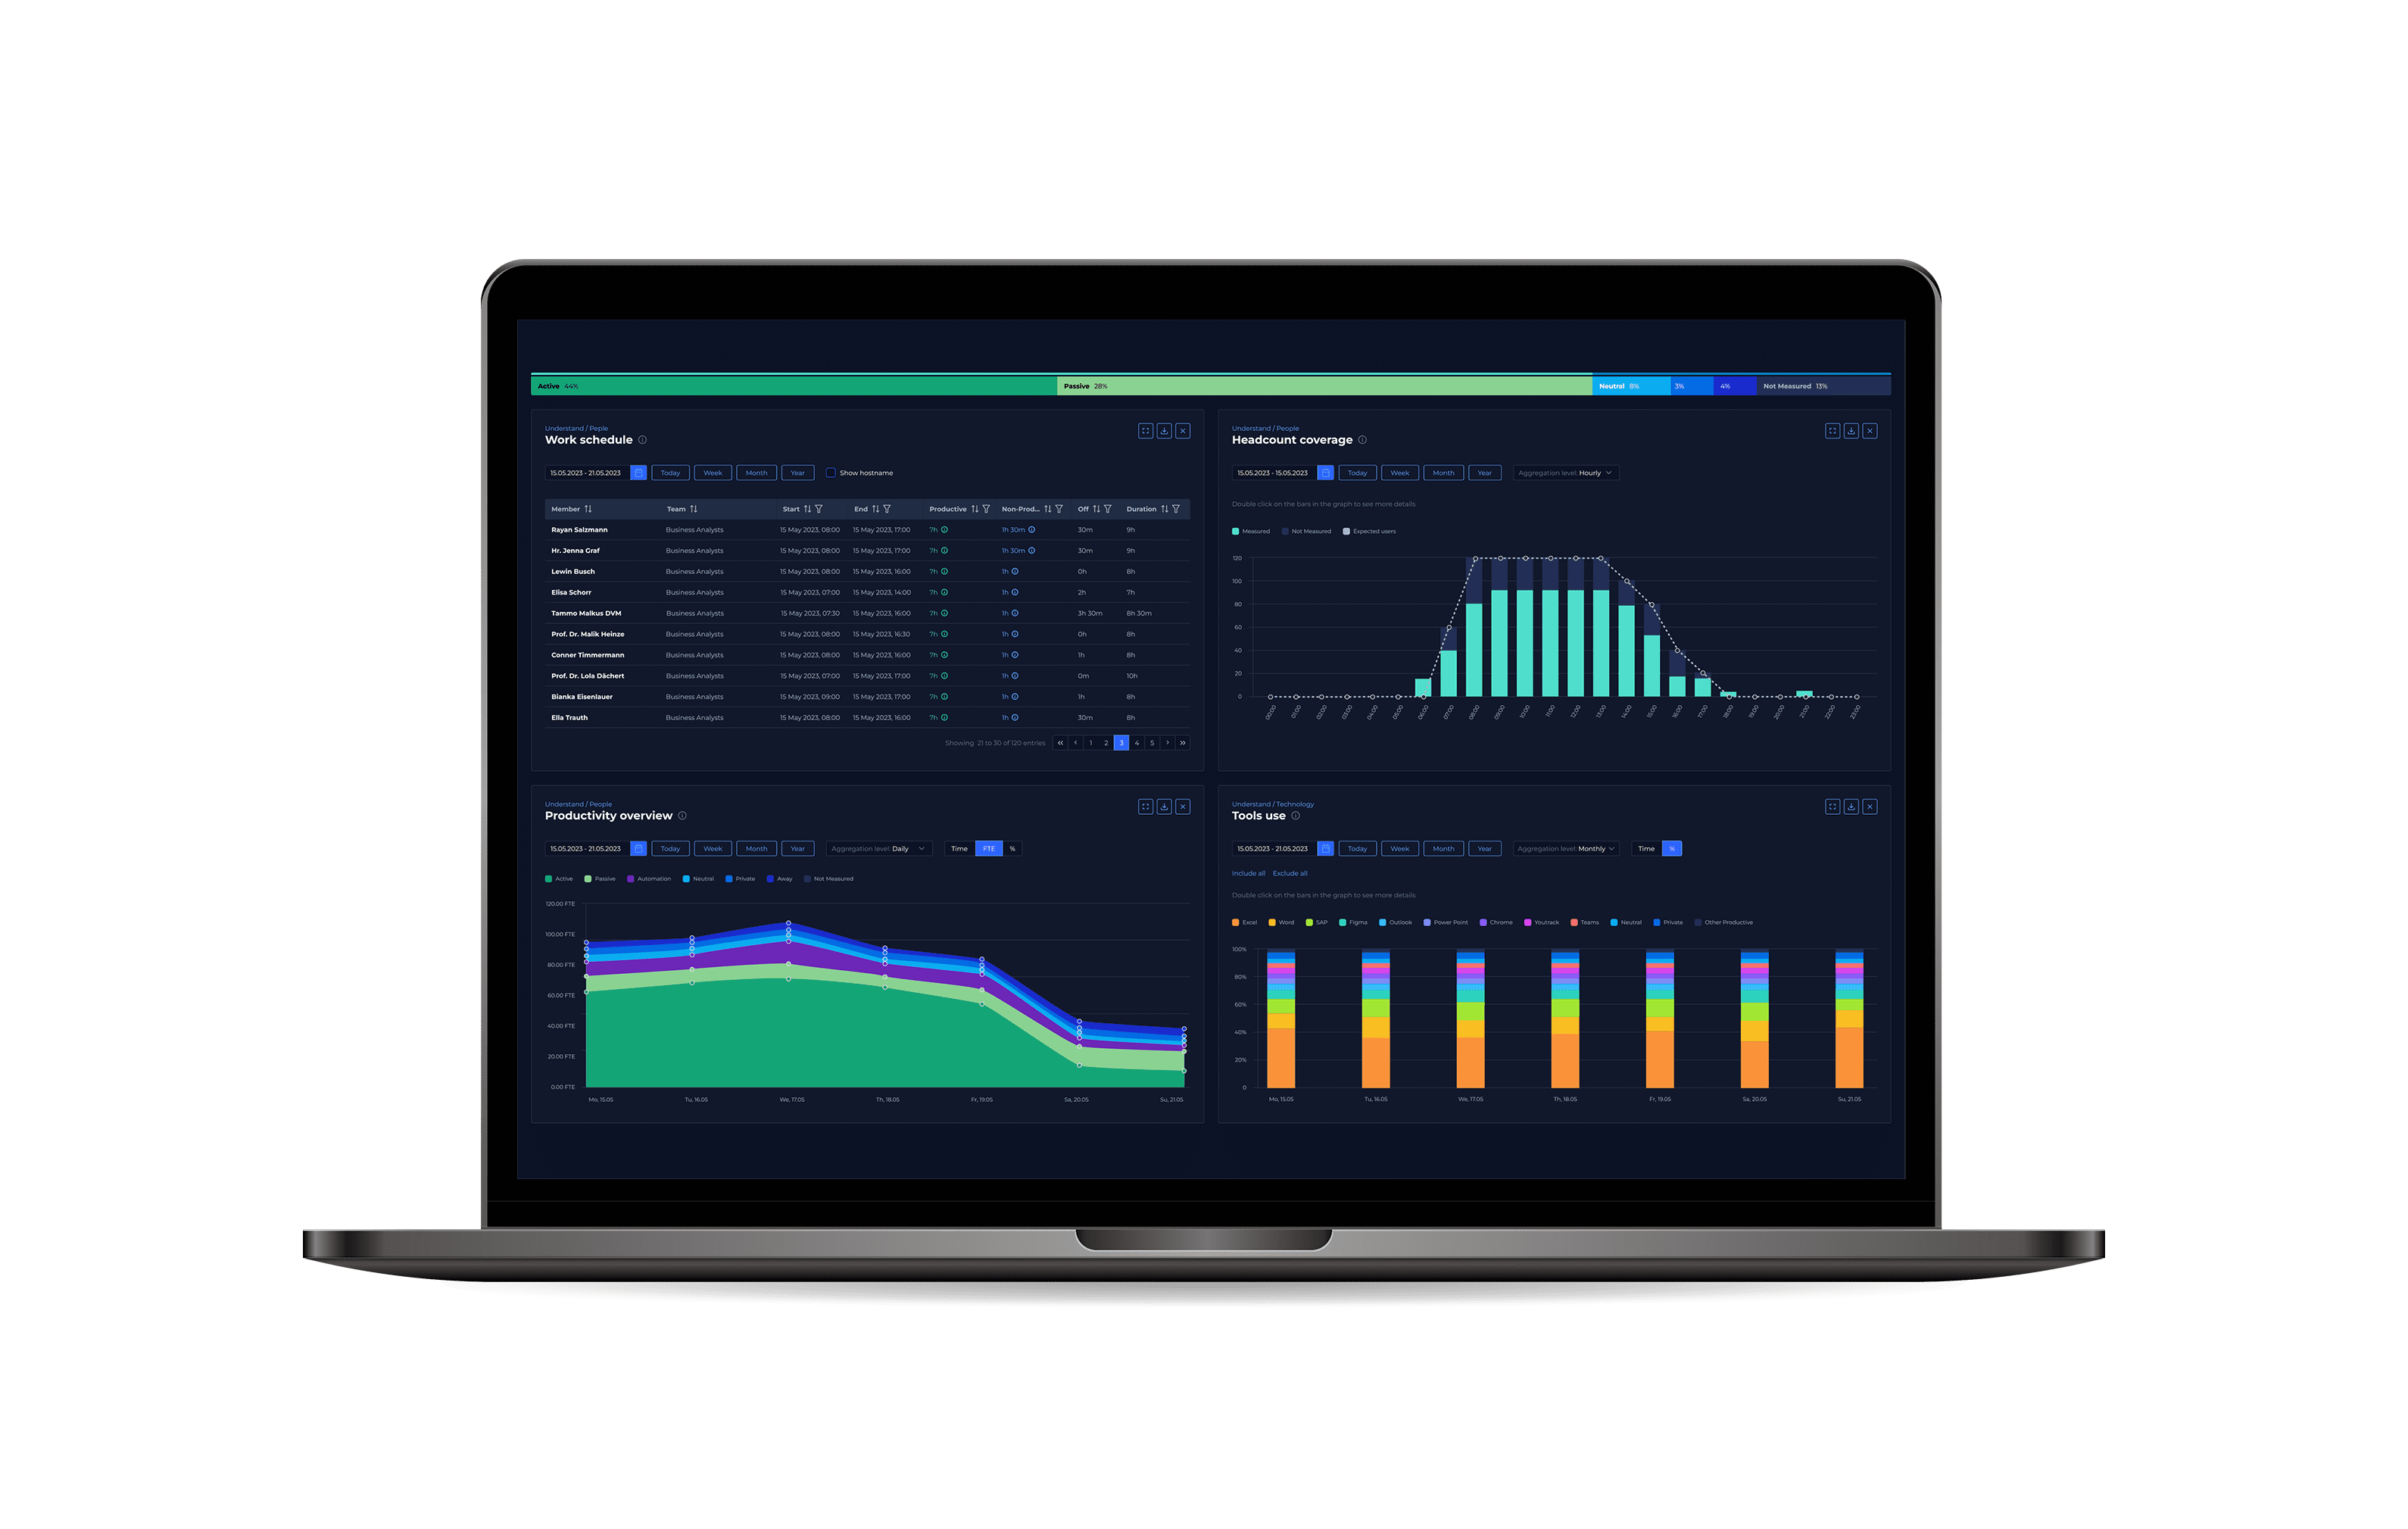 a dashboard with a holistic view of productivity mining platform